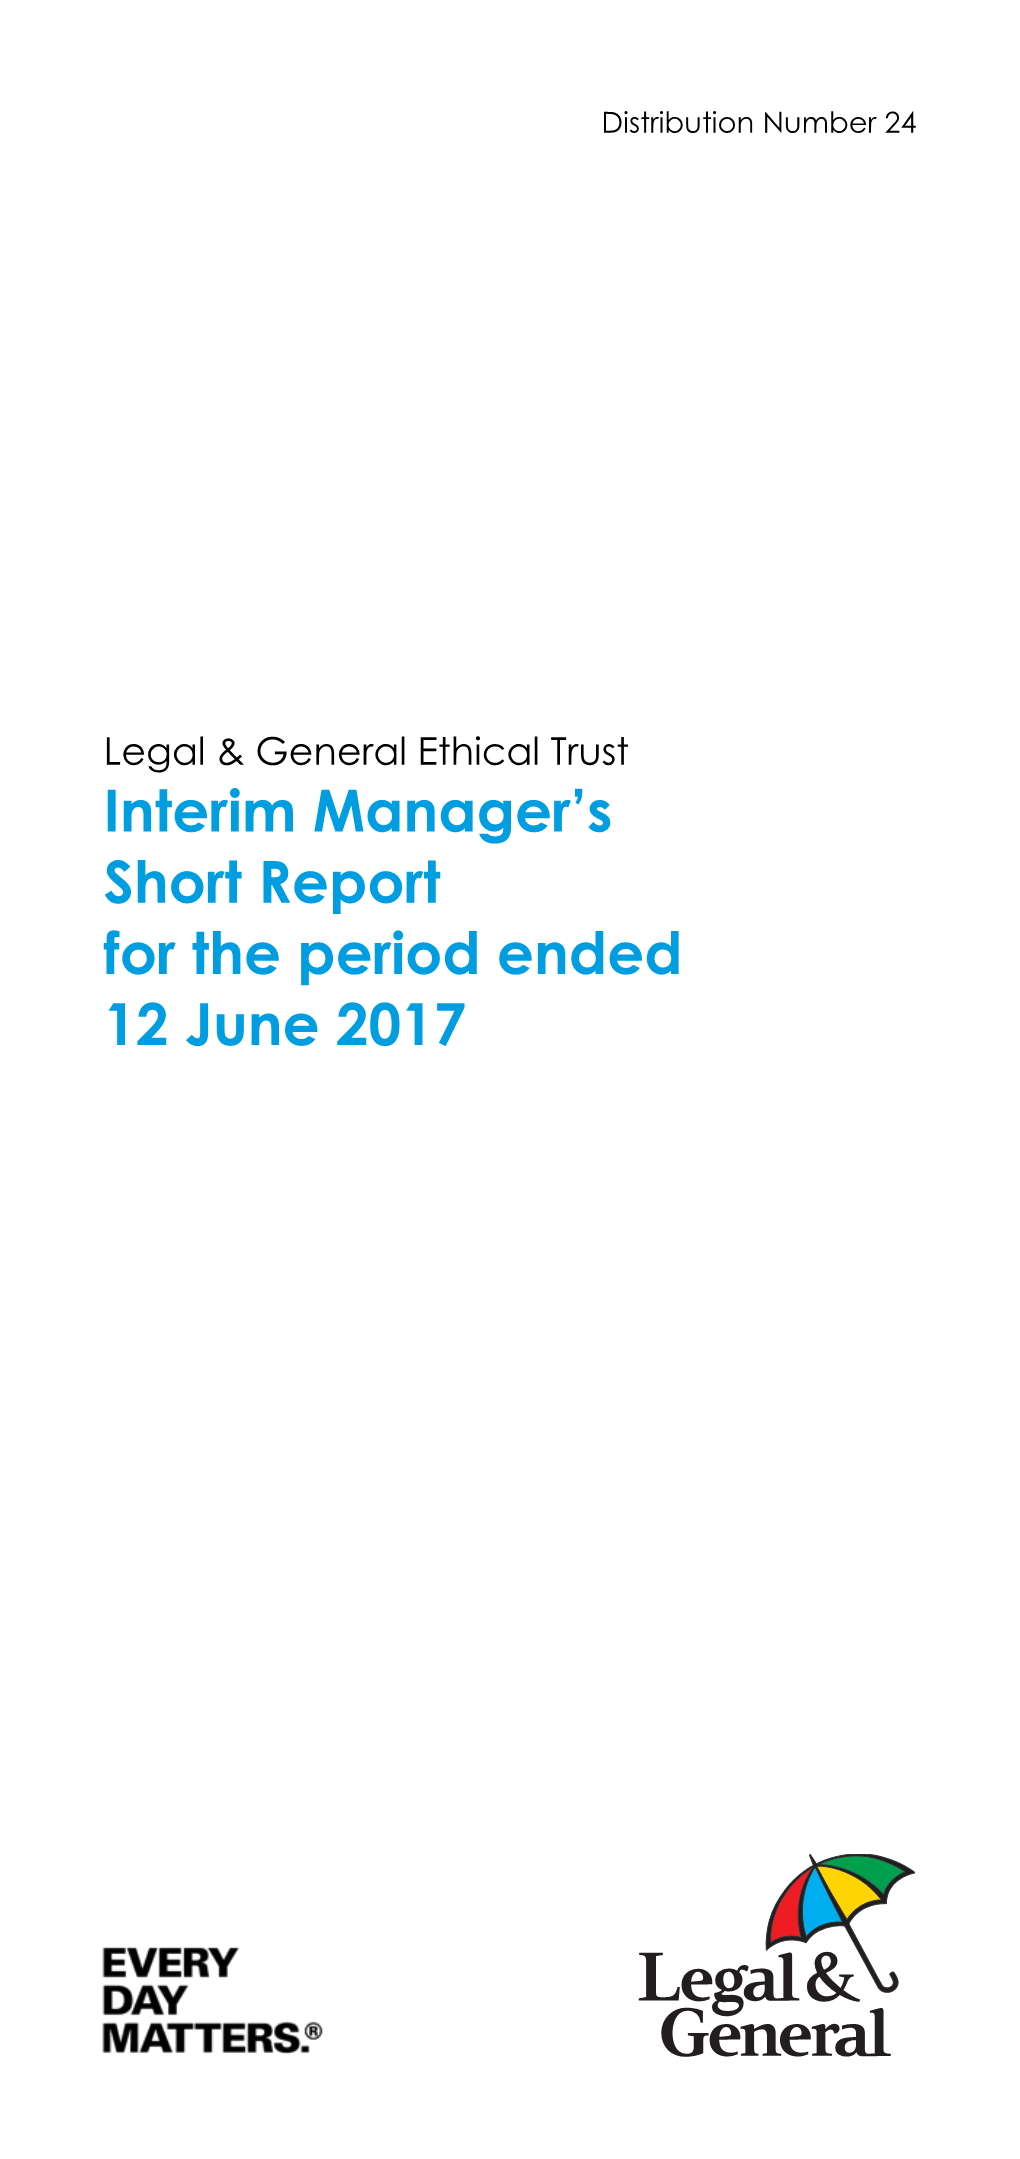 Interim Manager's Short Report for the Period